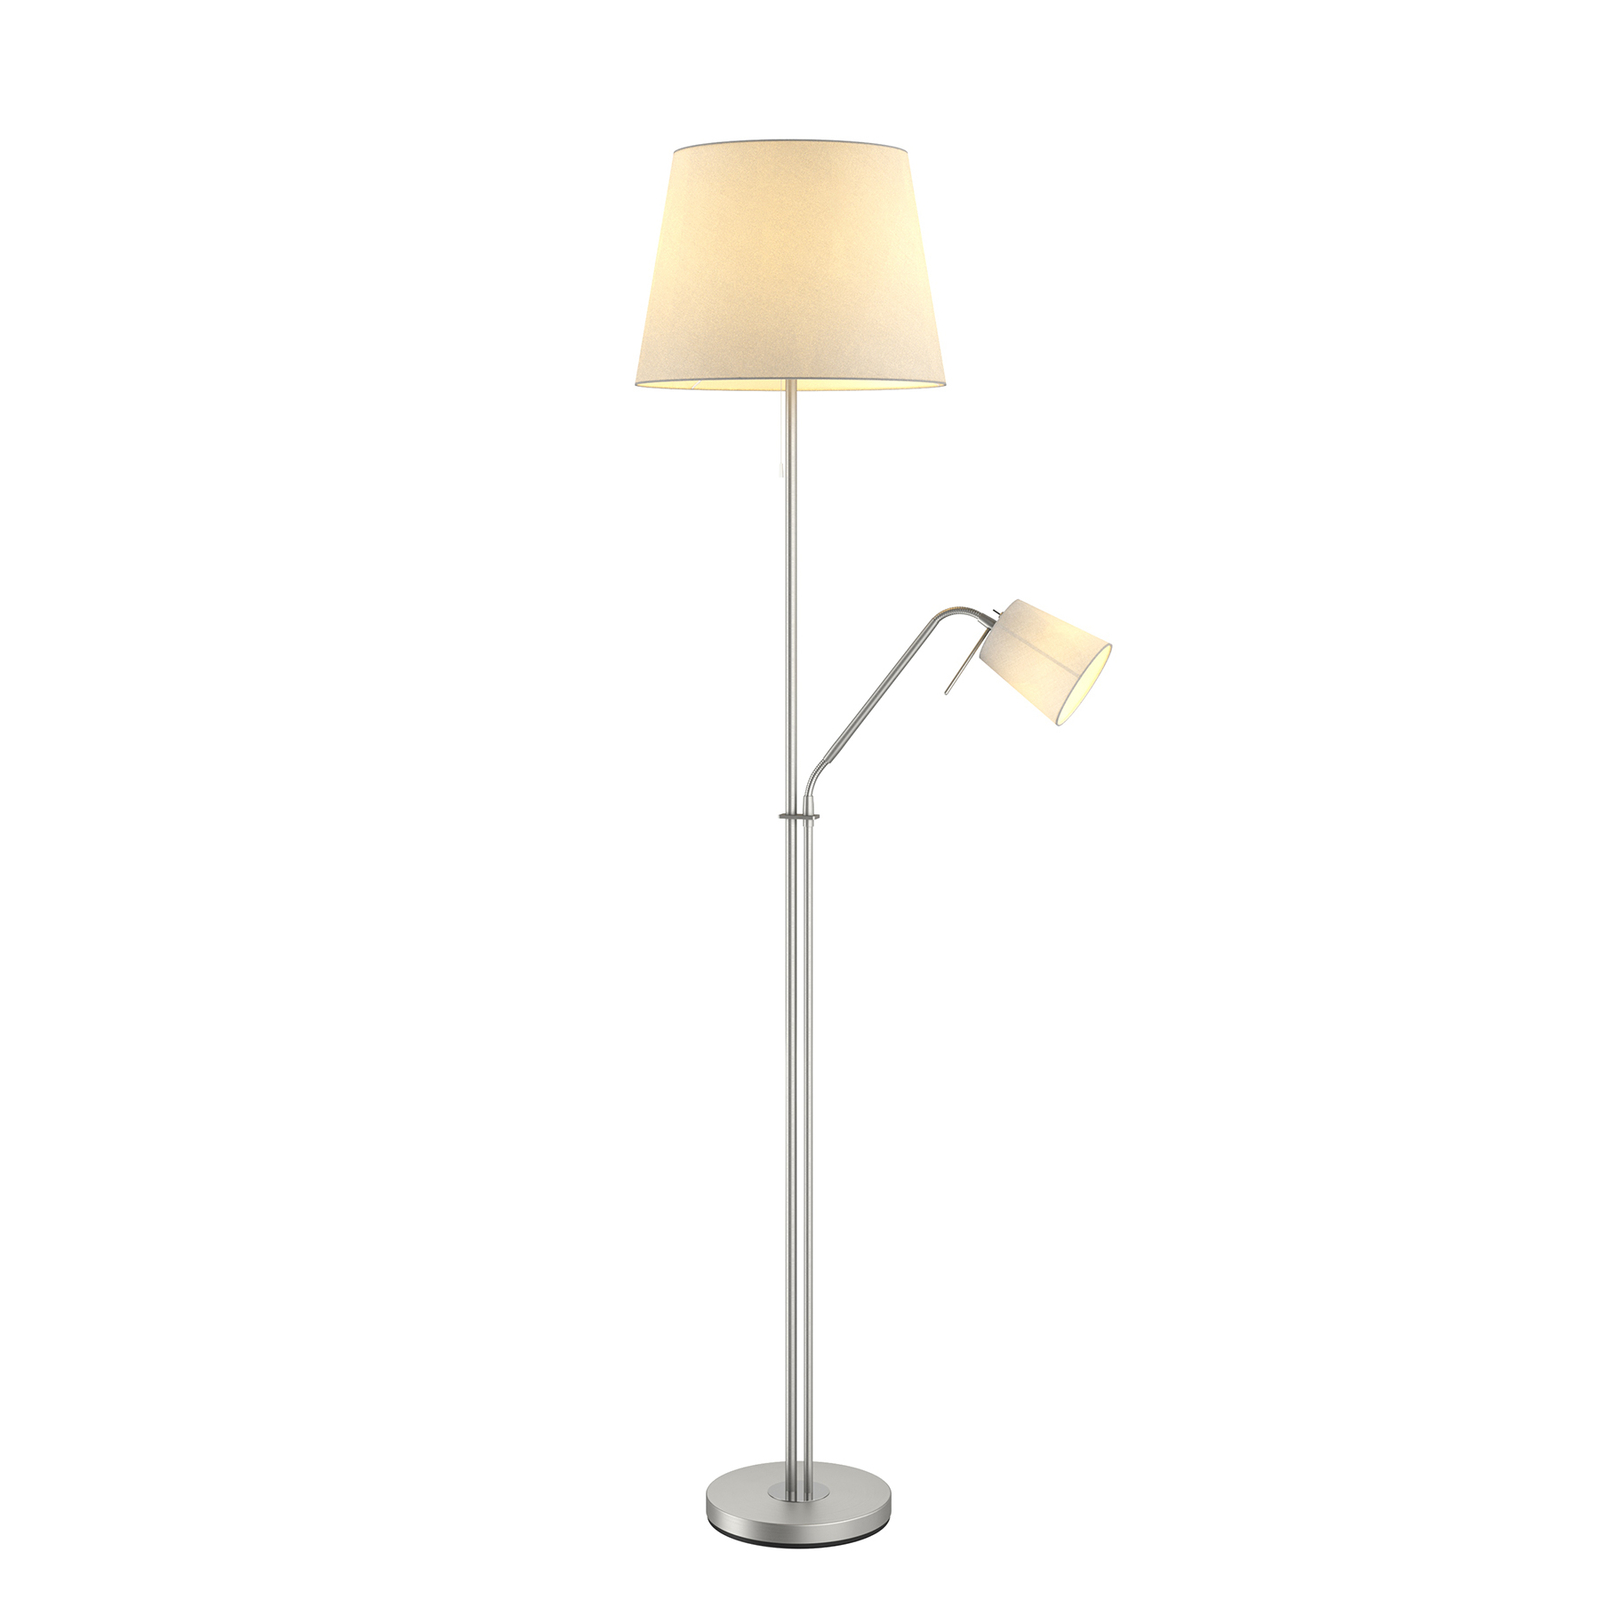 Lindby Nantwin floor lamp, fabric lampshade, white